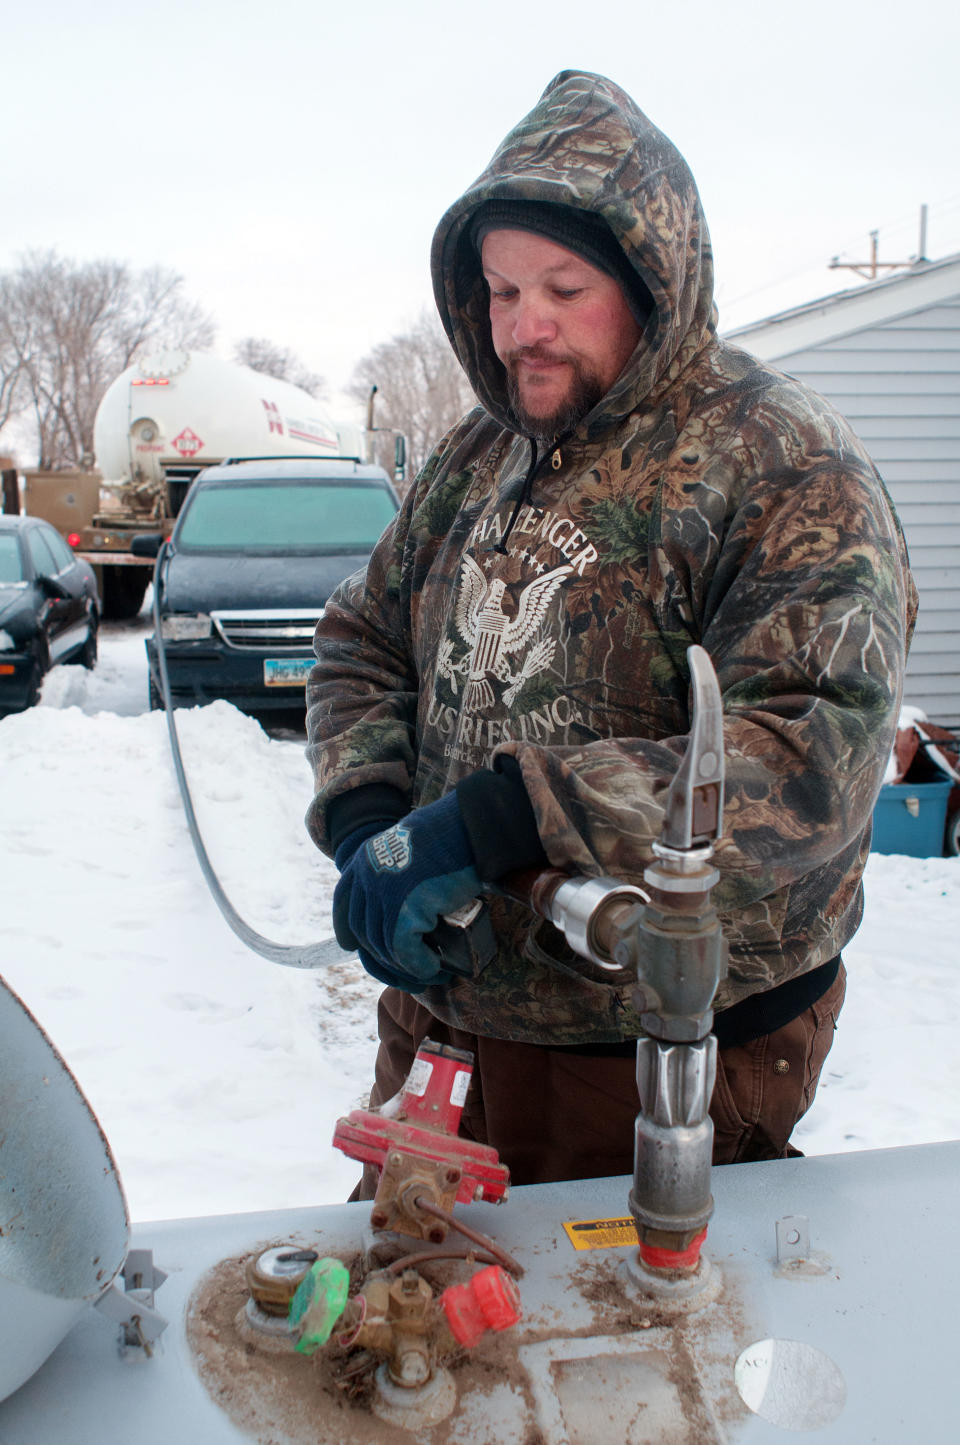 In this Thursday, Feb. 6, 2014 photo Ken Snider, who drives a propane truck, fills a tank outside a home on the Standing Rock Reservation in Fort Yates, N.D. Snider said the price of propane on the reservation this winter peaked at $4.65 a gallon, which is more than doubling of the fuel’s cost has crippled efforts to stay warm _ and alive _ through the harsh winter where most people rely on propane to heat their often ramshackle homes. (AP Photo/Kevin Cederstrom)